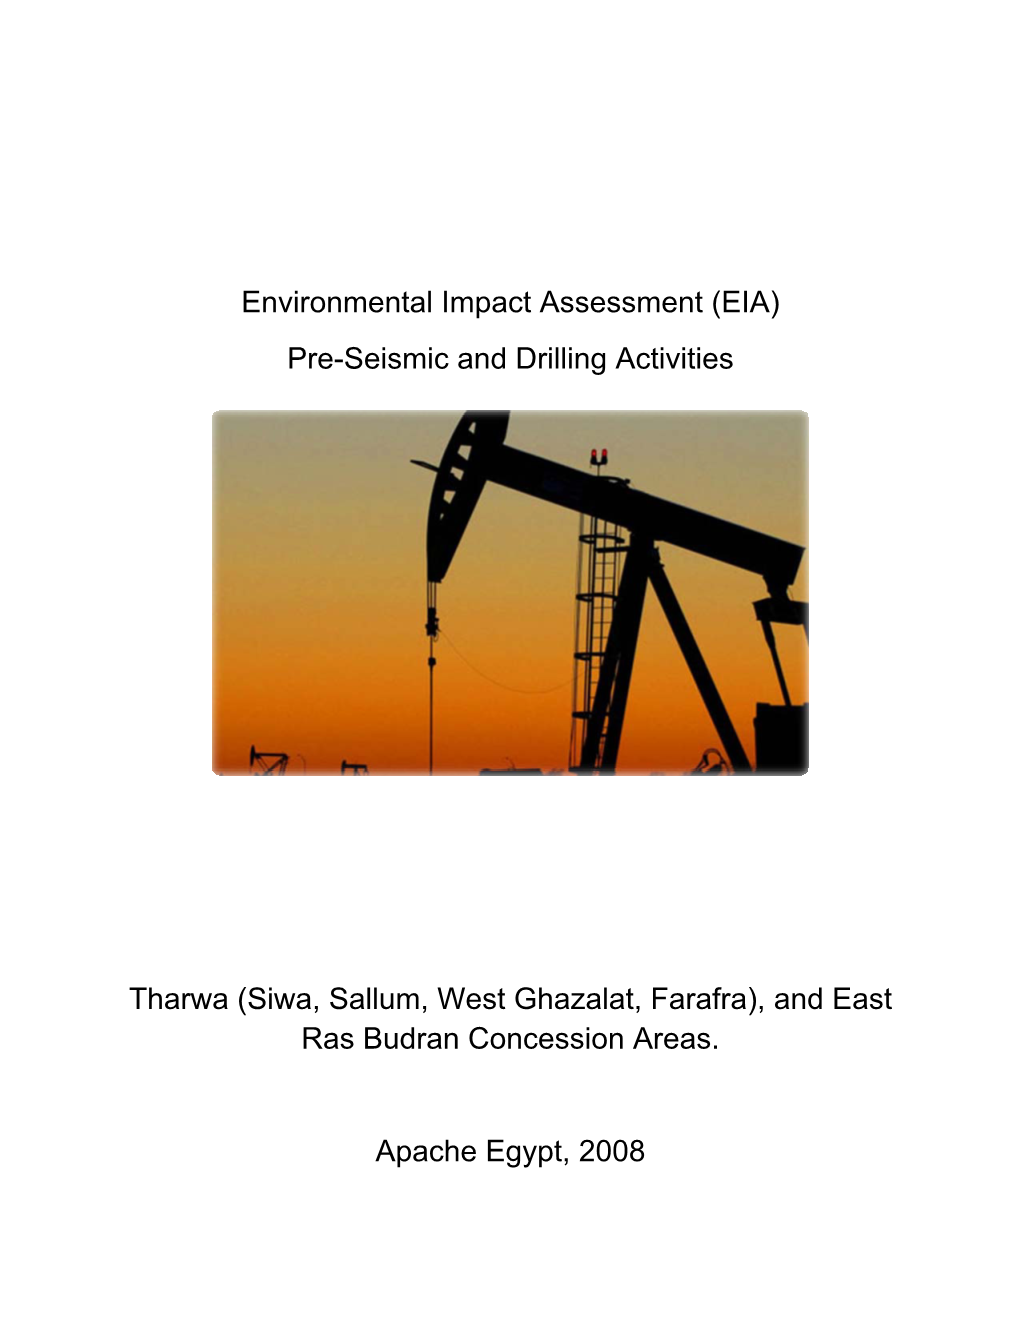 Environmental Impact Assessment (EIA) Pre-Seismic and Drilling Activities